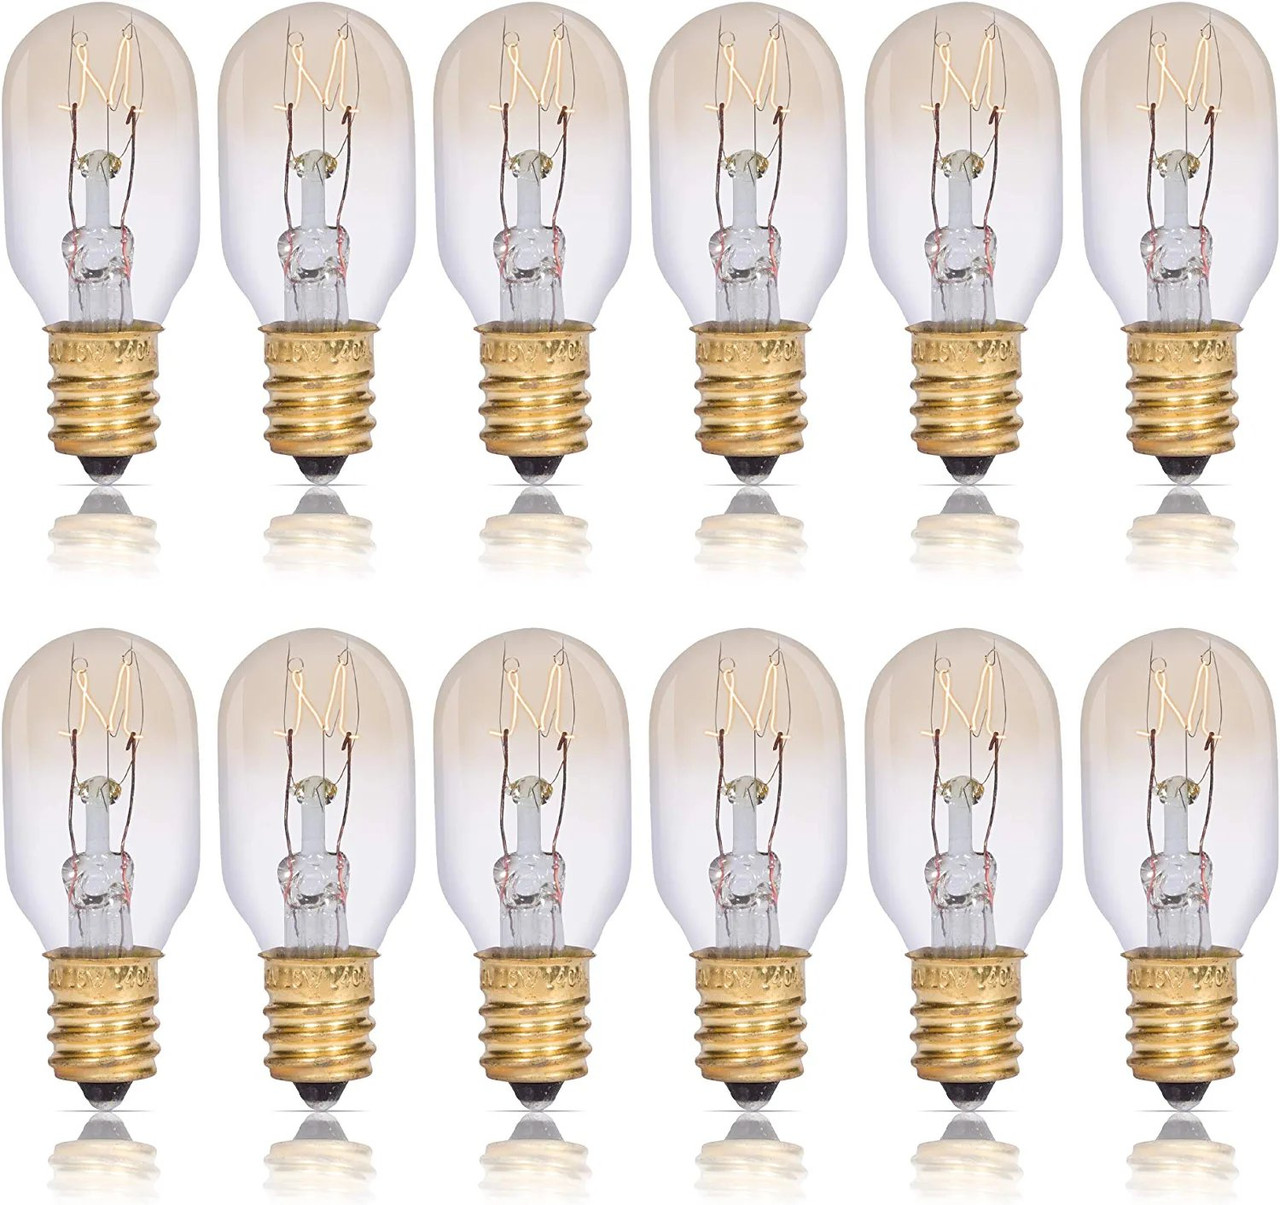 Simba Lighting C7 15W Replacement Bulb Clear Candle Shape 120V, E12 Candelabra Base, 2700K, 6-Pack | Cheetah Trading Post